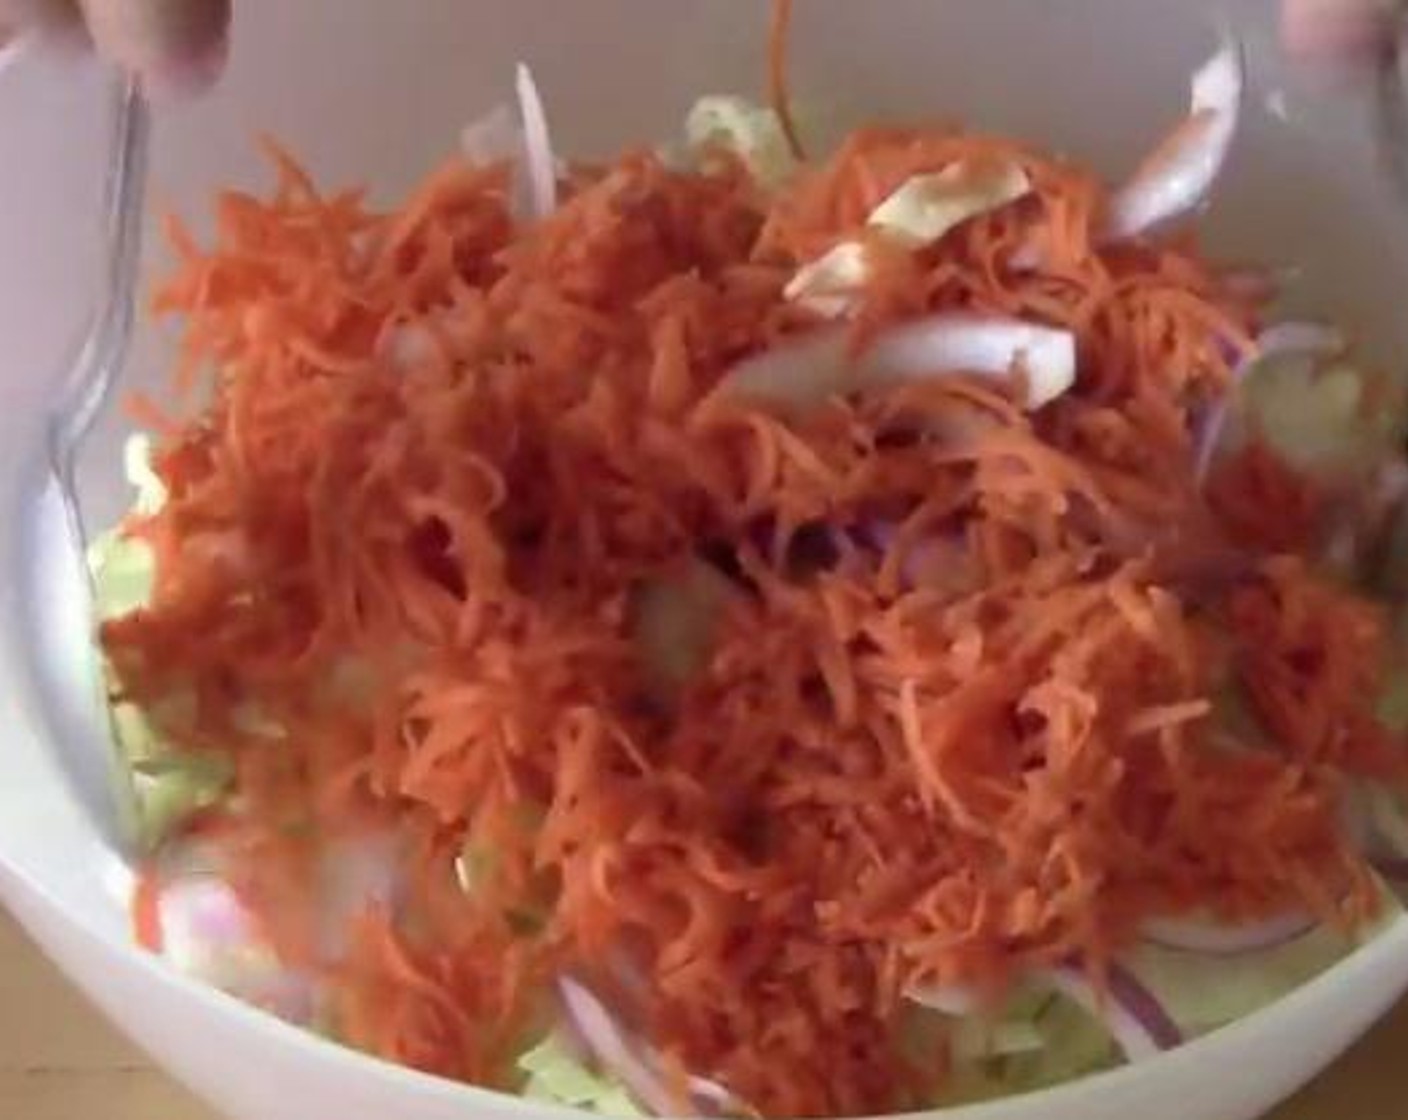 step 1 Into a bowl, add and mix the Green Cabbage (1/2), Red Onion (1/2), and Carrots (2)